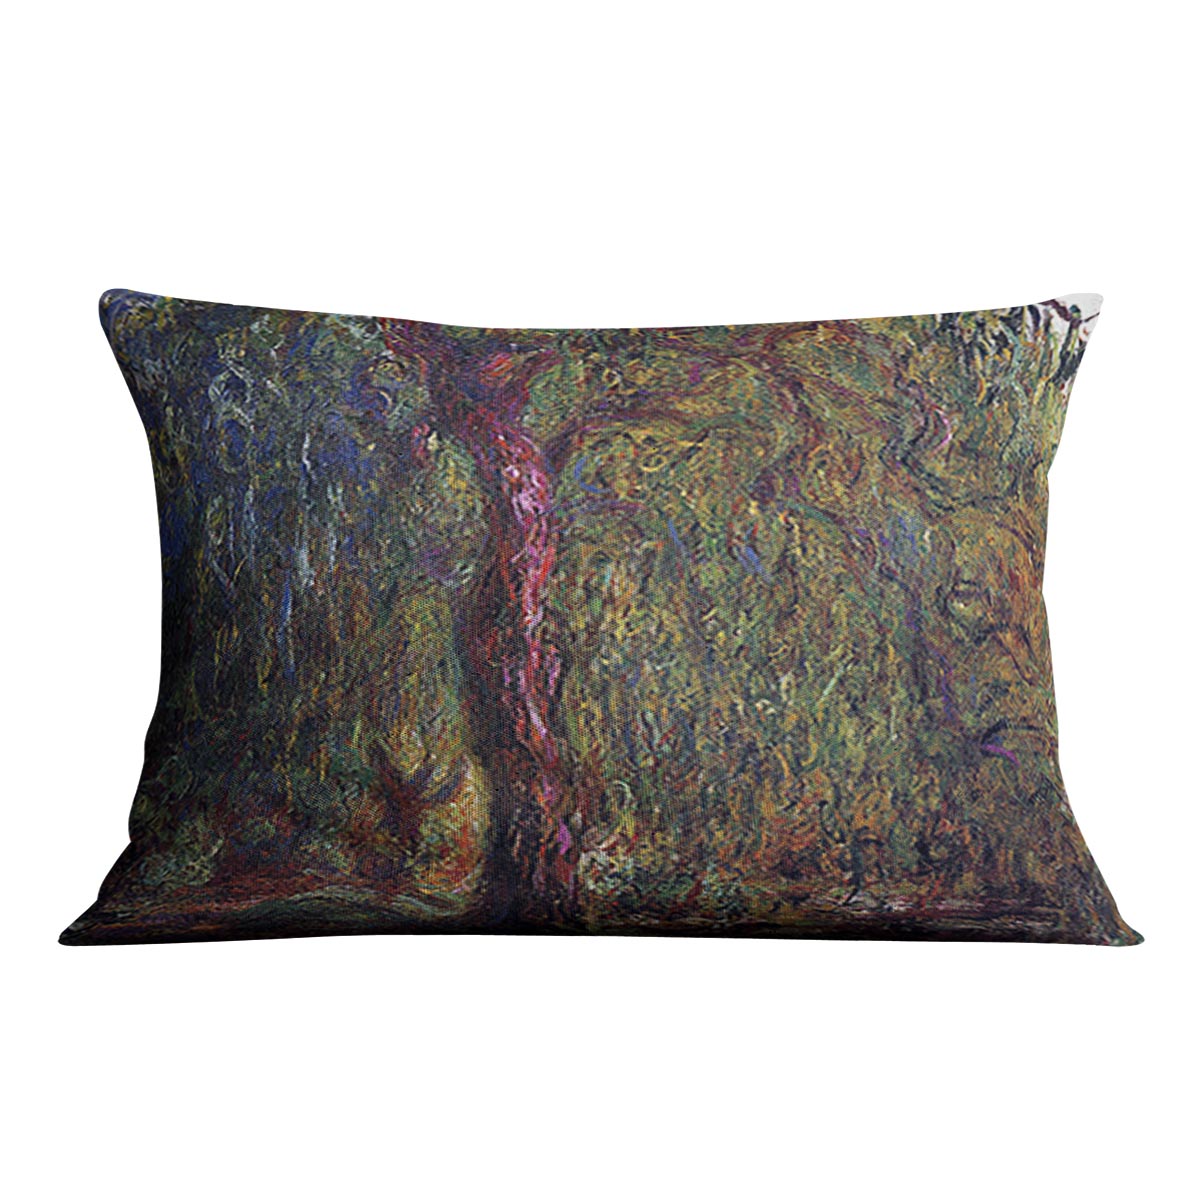 Weeping willow by Monet Cushion